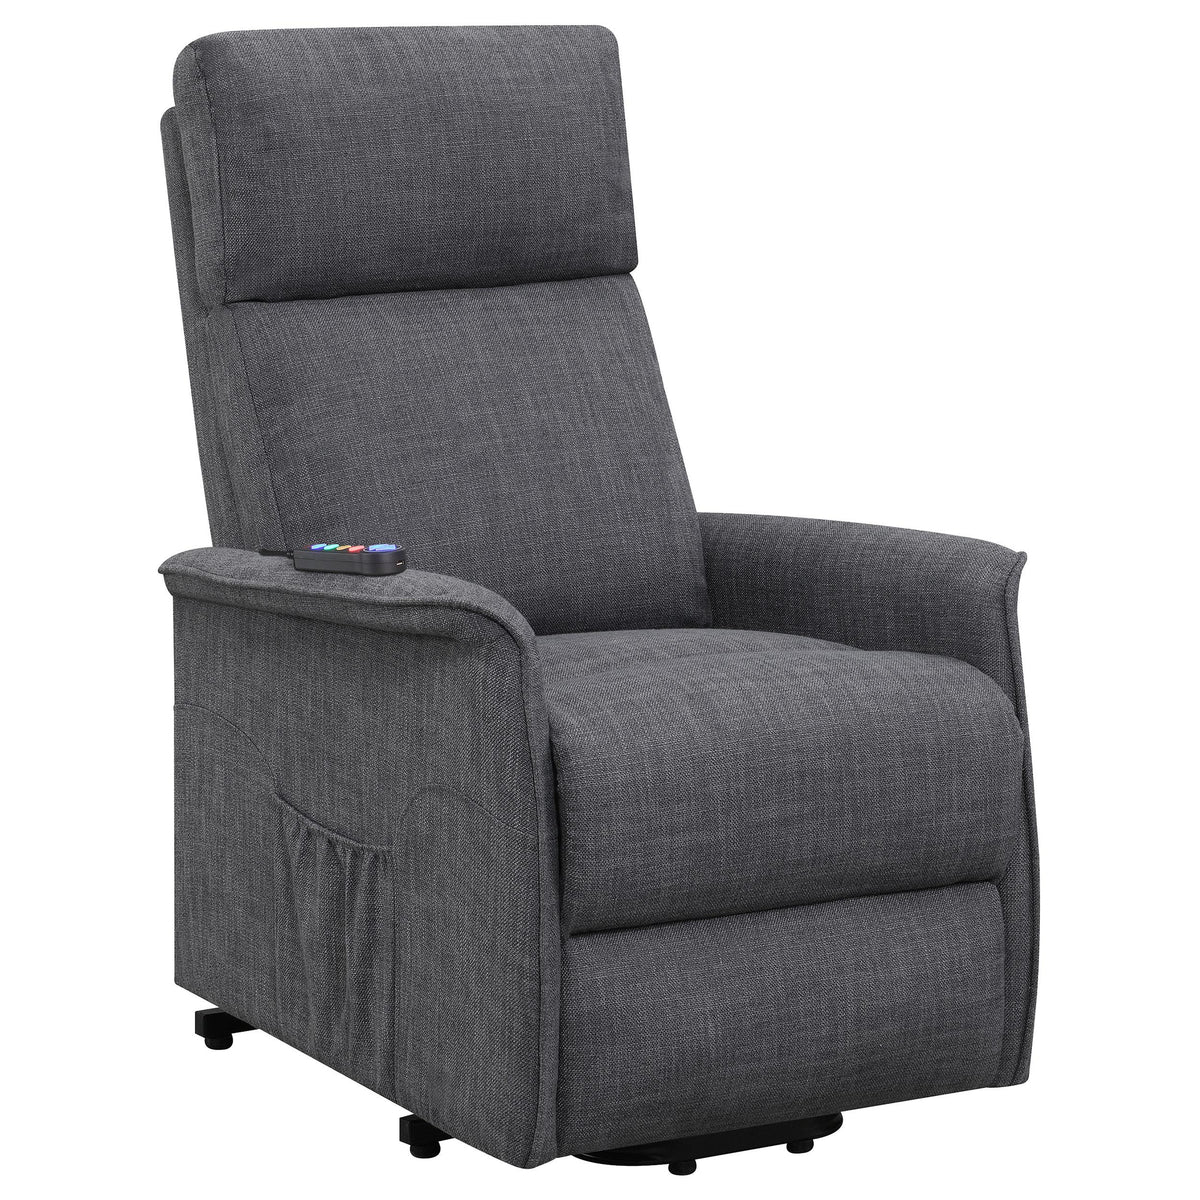 Herrera Power Lift Recliner with Wired Remote Charcoal  Las Vegas Furniture Stores